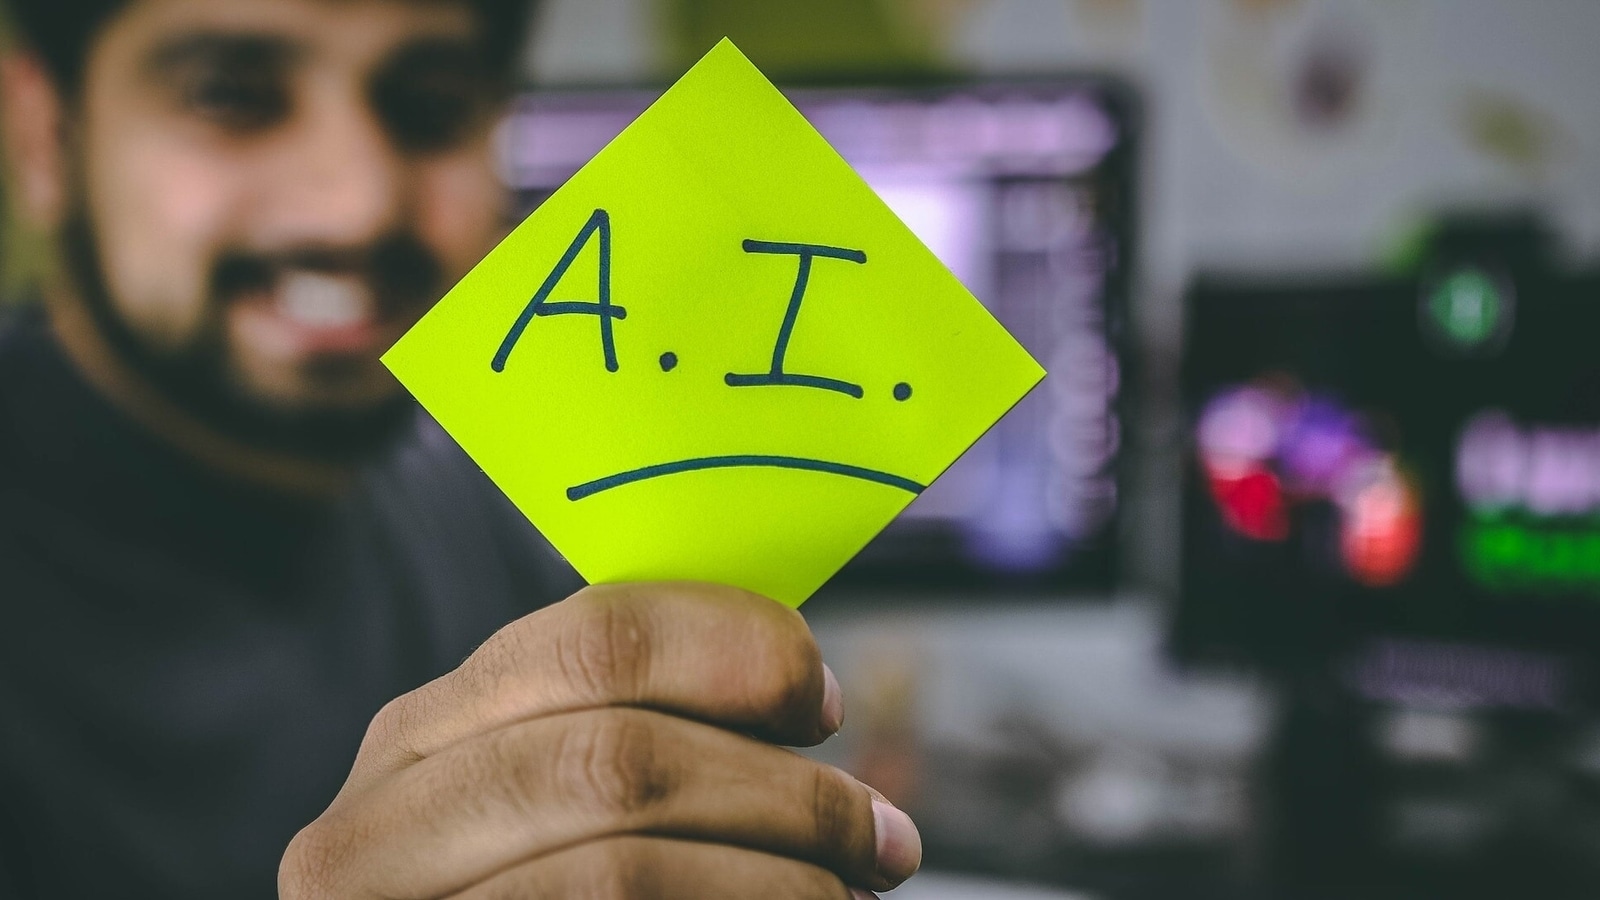 AI threat alert: Artificial intelligence risks need to be better understood and managed